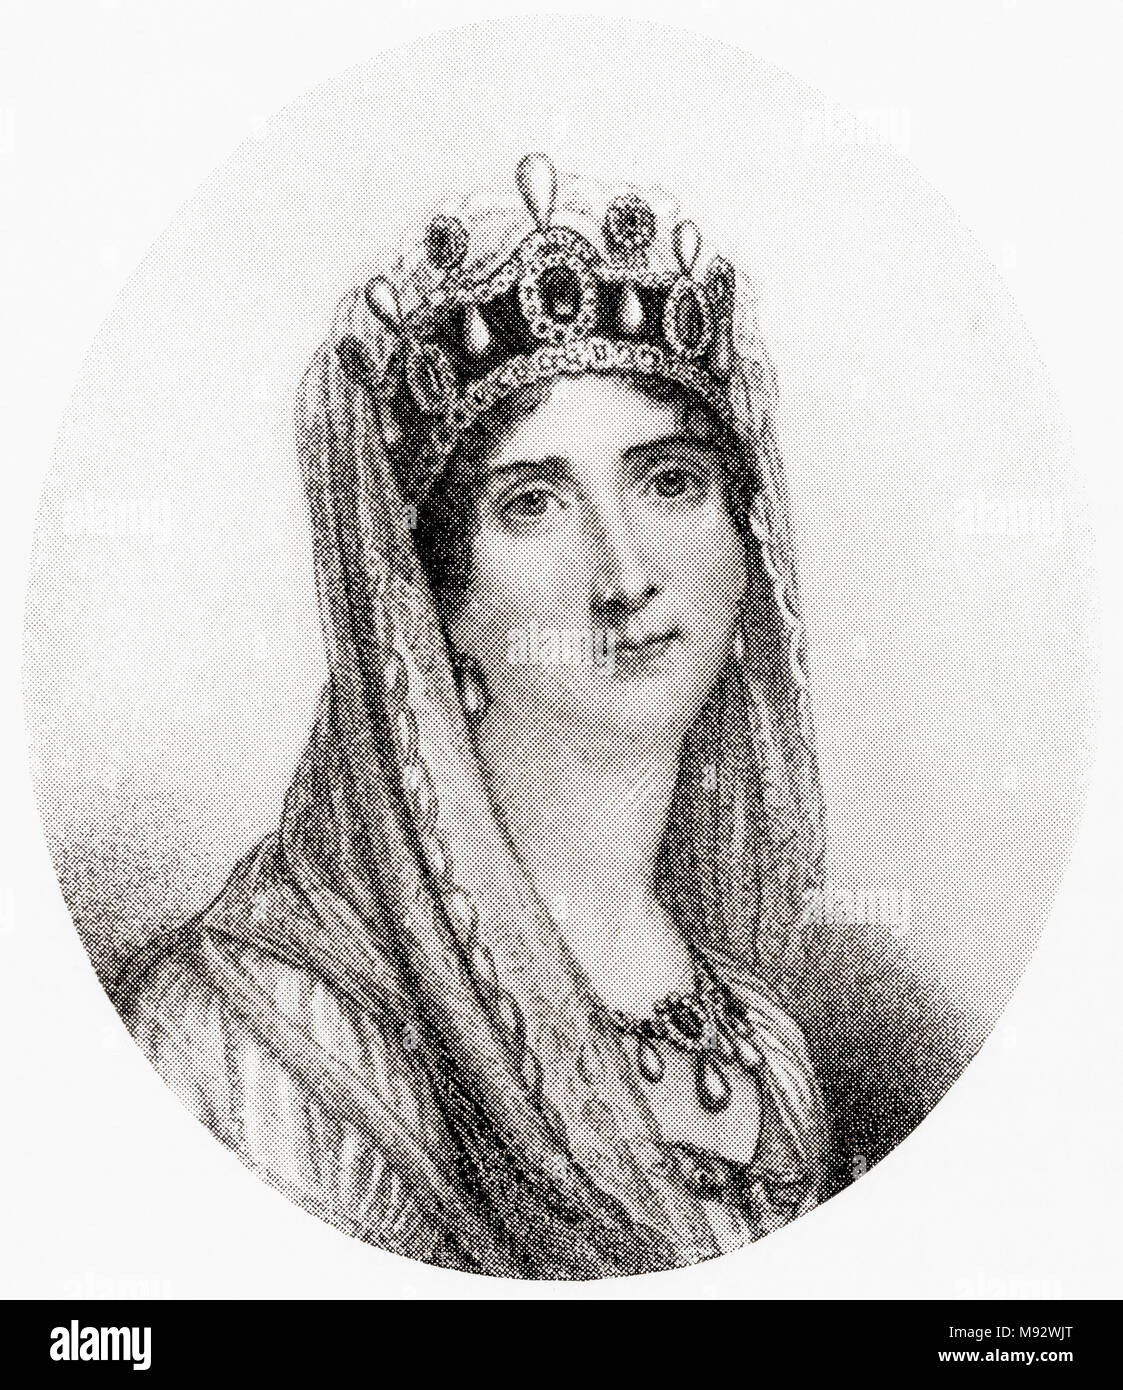 Joséphine de Beauharnais, née Tascher de la Pagerie, 1763 – 1814.   First Empress of the French as the first wife of Napoleon I.  From Hutchinson's History of the Nations, published 1915 Stock Photo